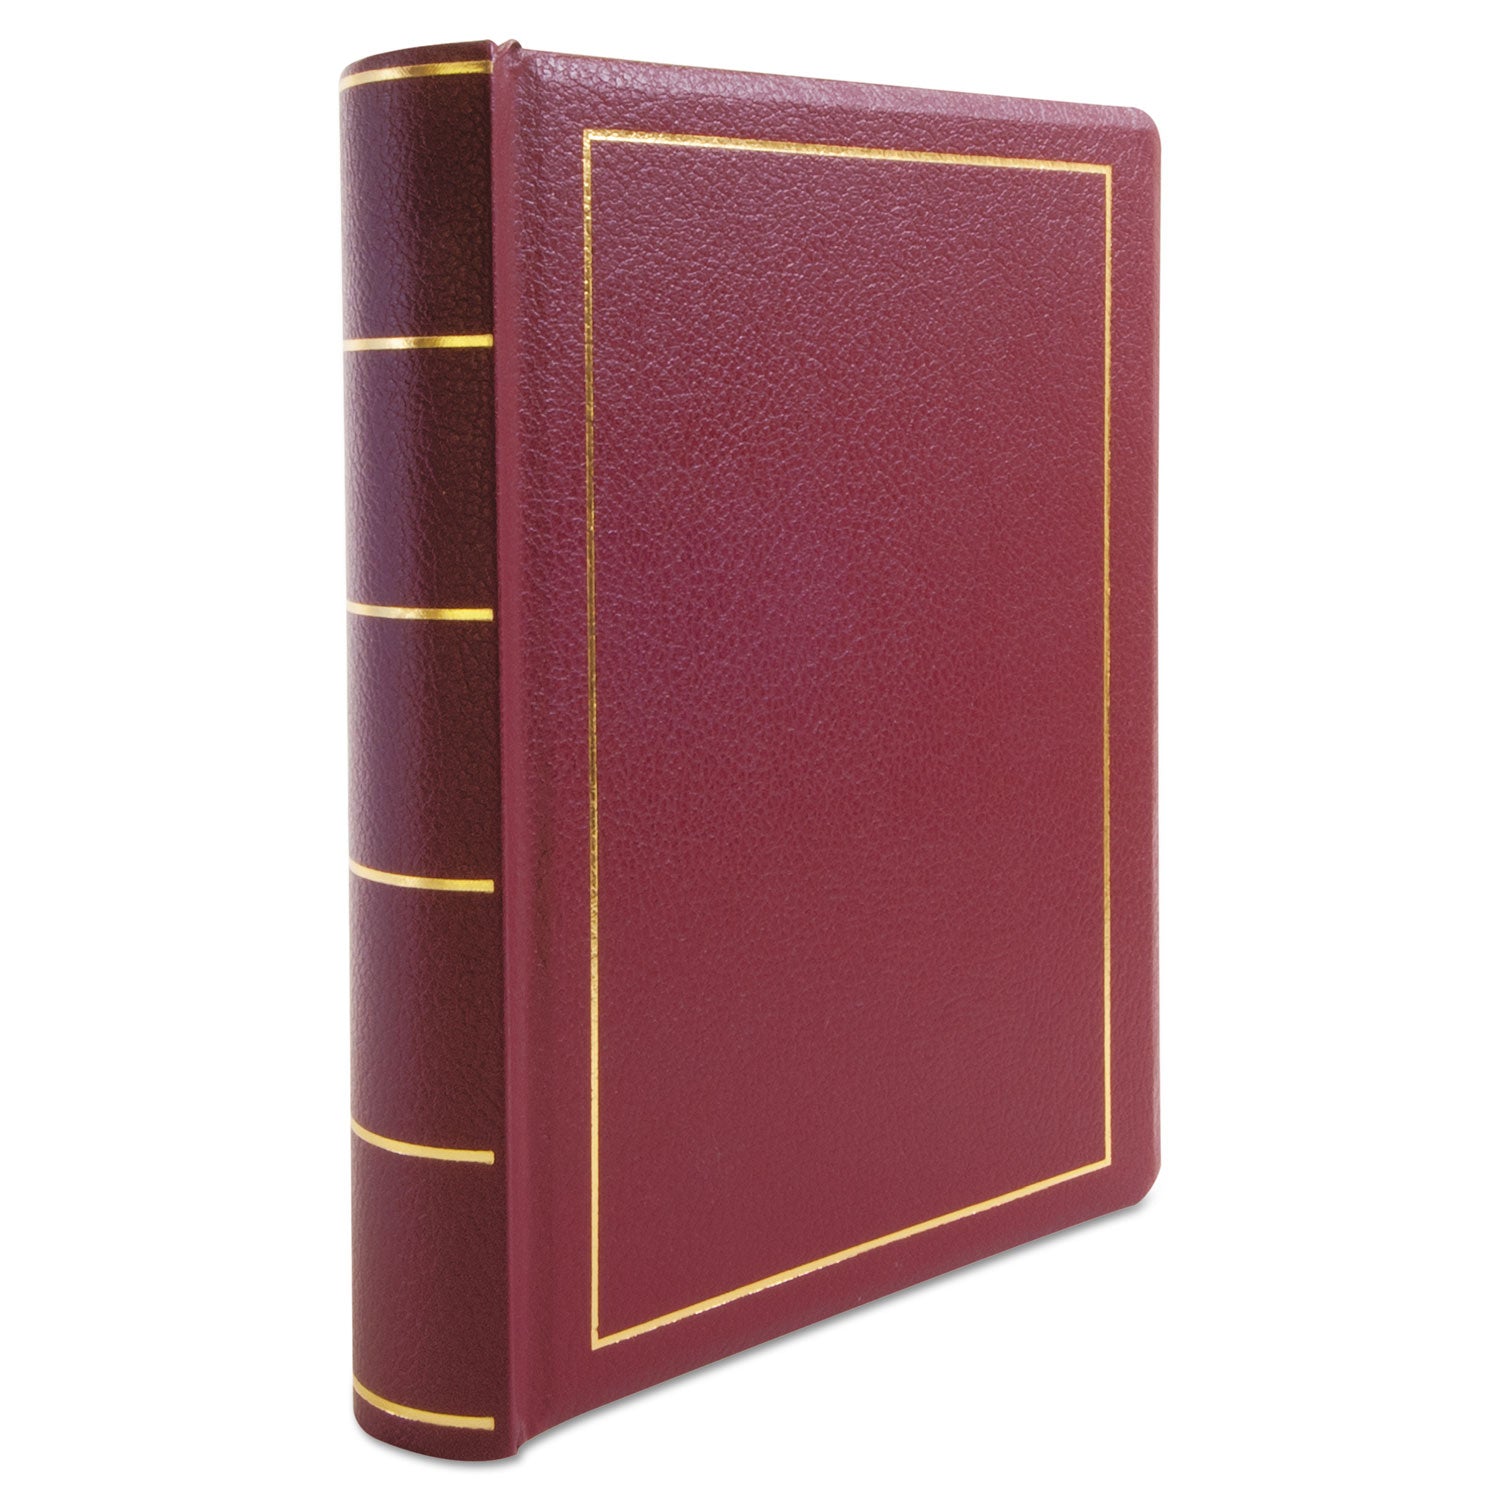 Looseleaf Corporation Minute Book, 1-Subject, Unruled, Red/Gold Cover, (250) 11 x 8.5 Sheets - 